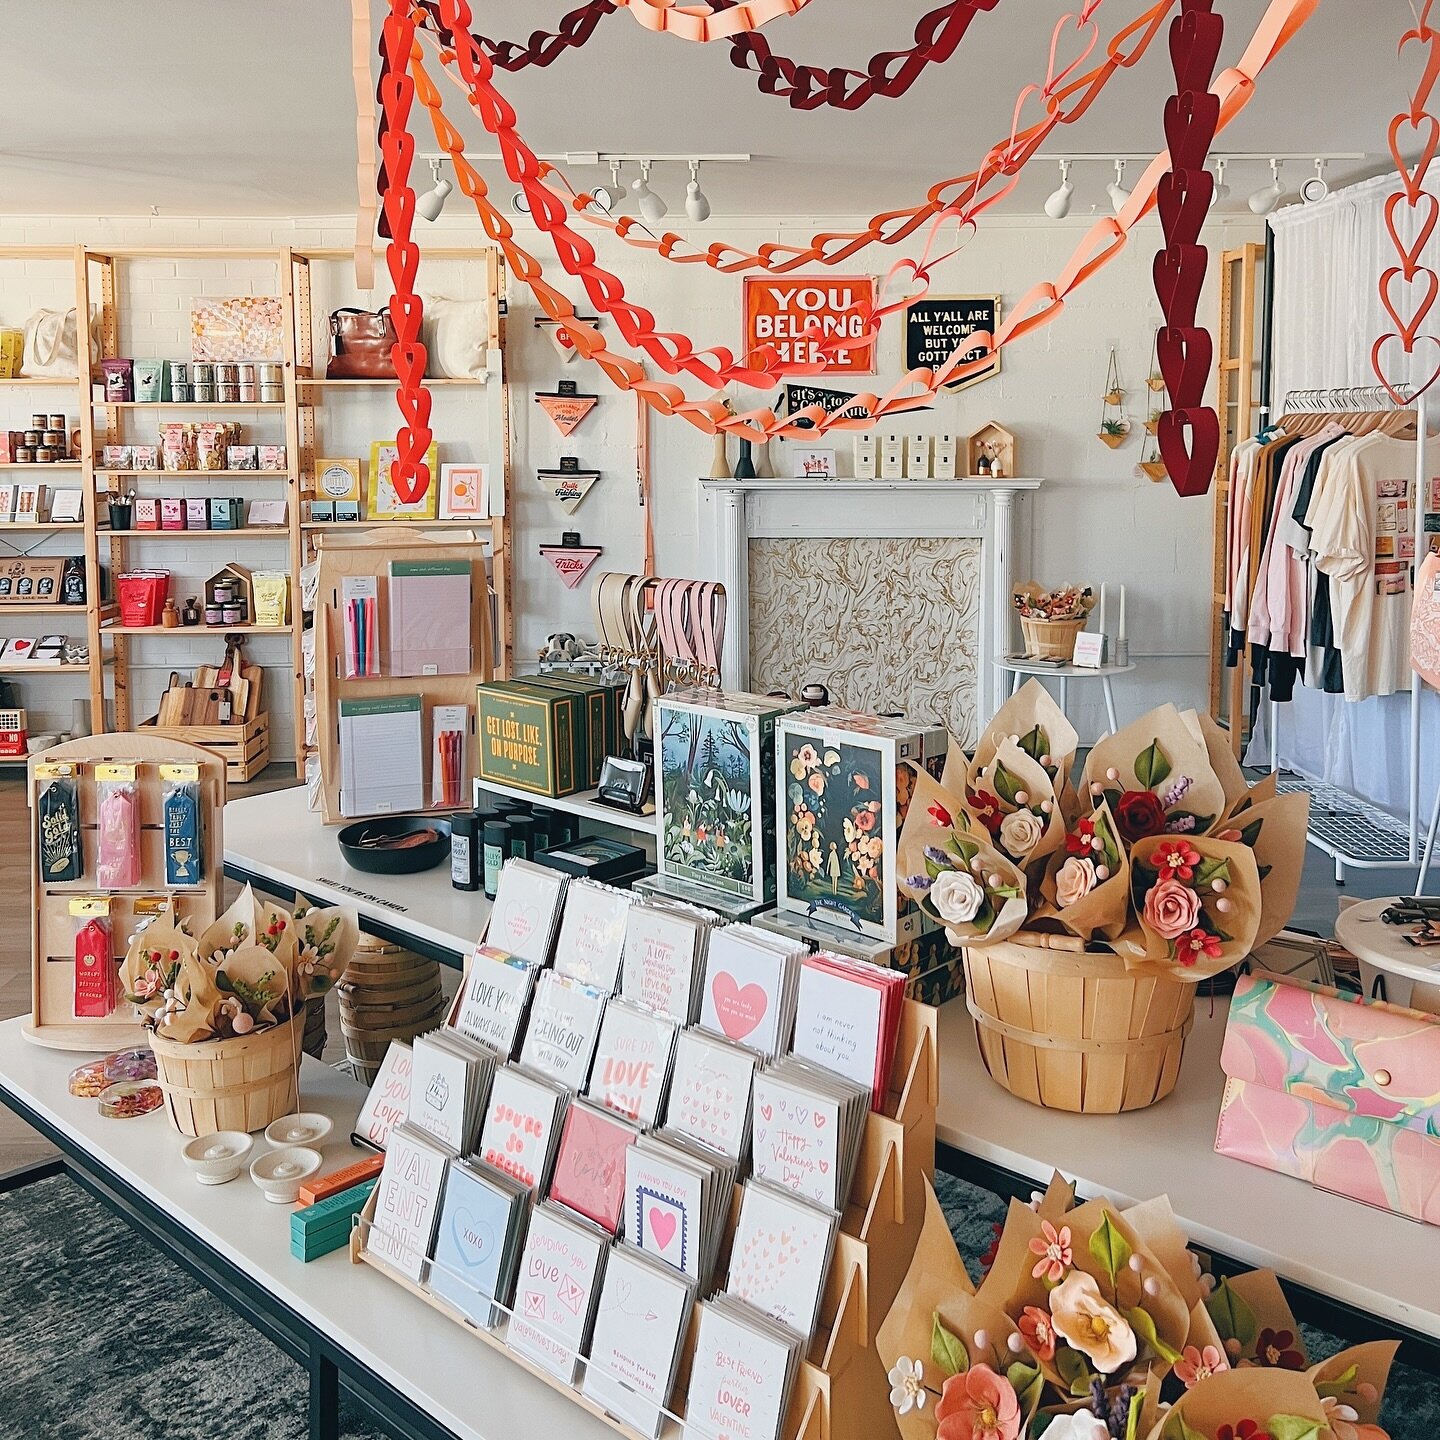 ❤️ OPEN TODAY! ❤️ The Valentine Pop Up Shop is open Feb. 14 from 11am-3pm for all your last minute gifting. Come shop handmade and celebrate those you love. And yes, we still have plenty of flower bouquets, cards, and sweets!

❤️ The Valentine Pop Up